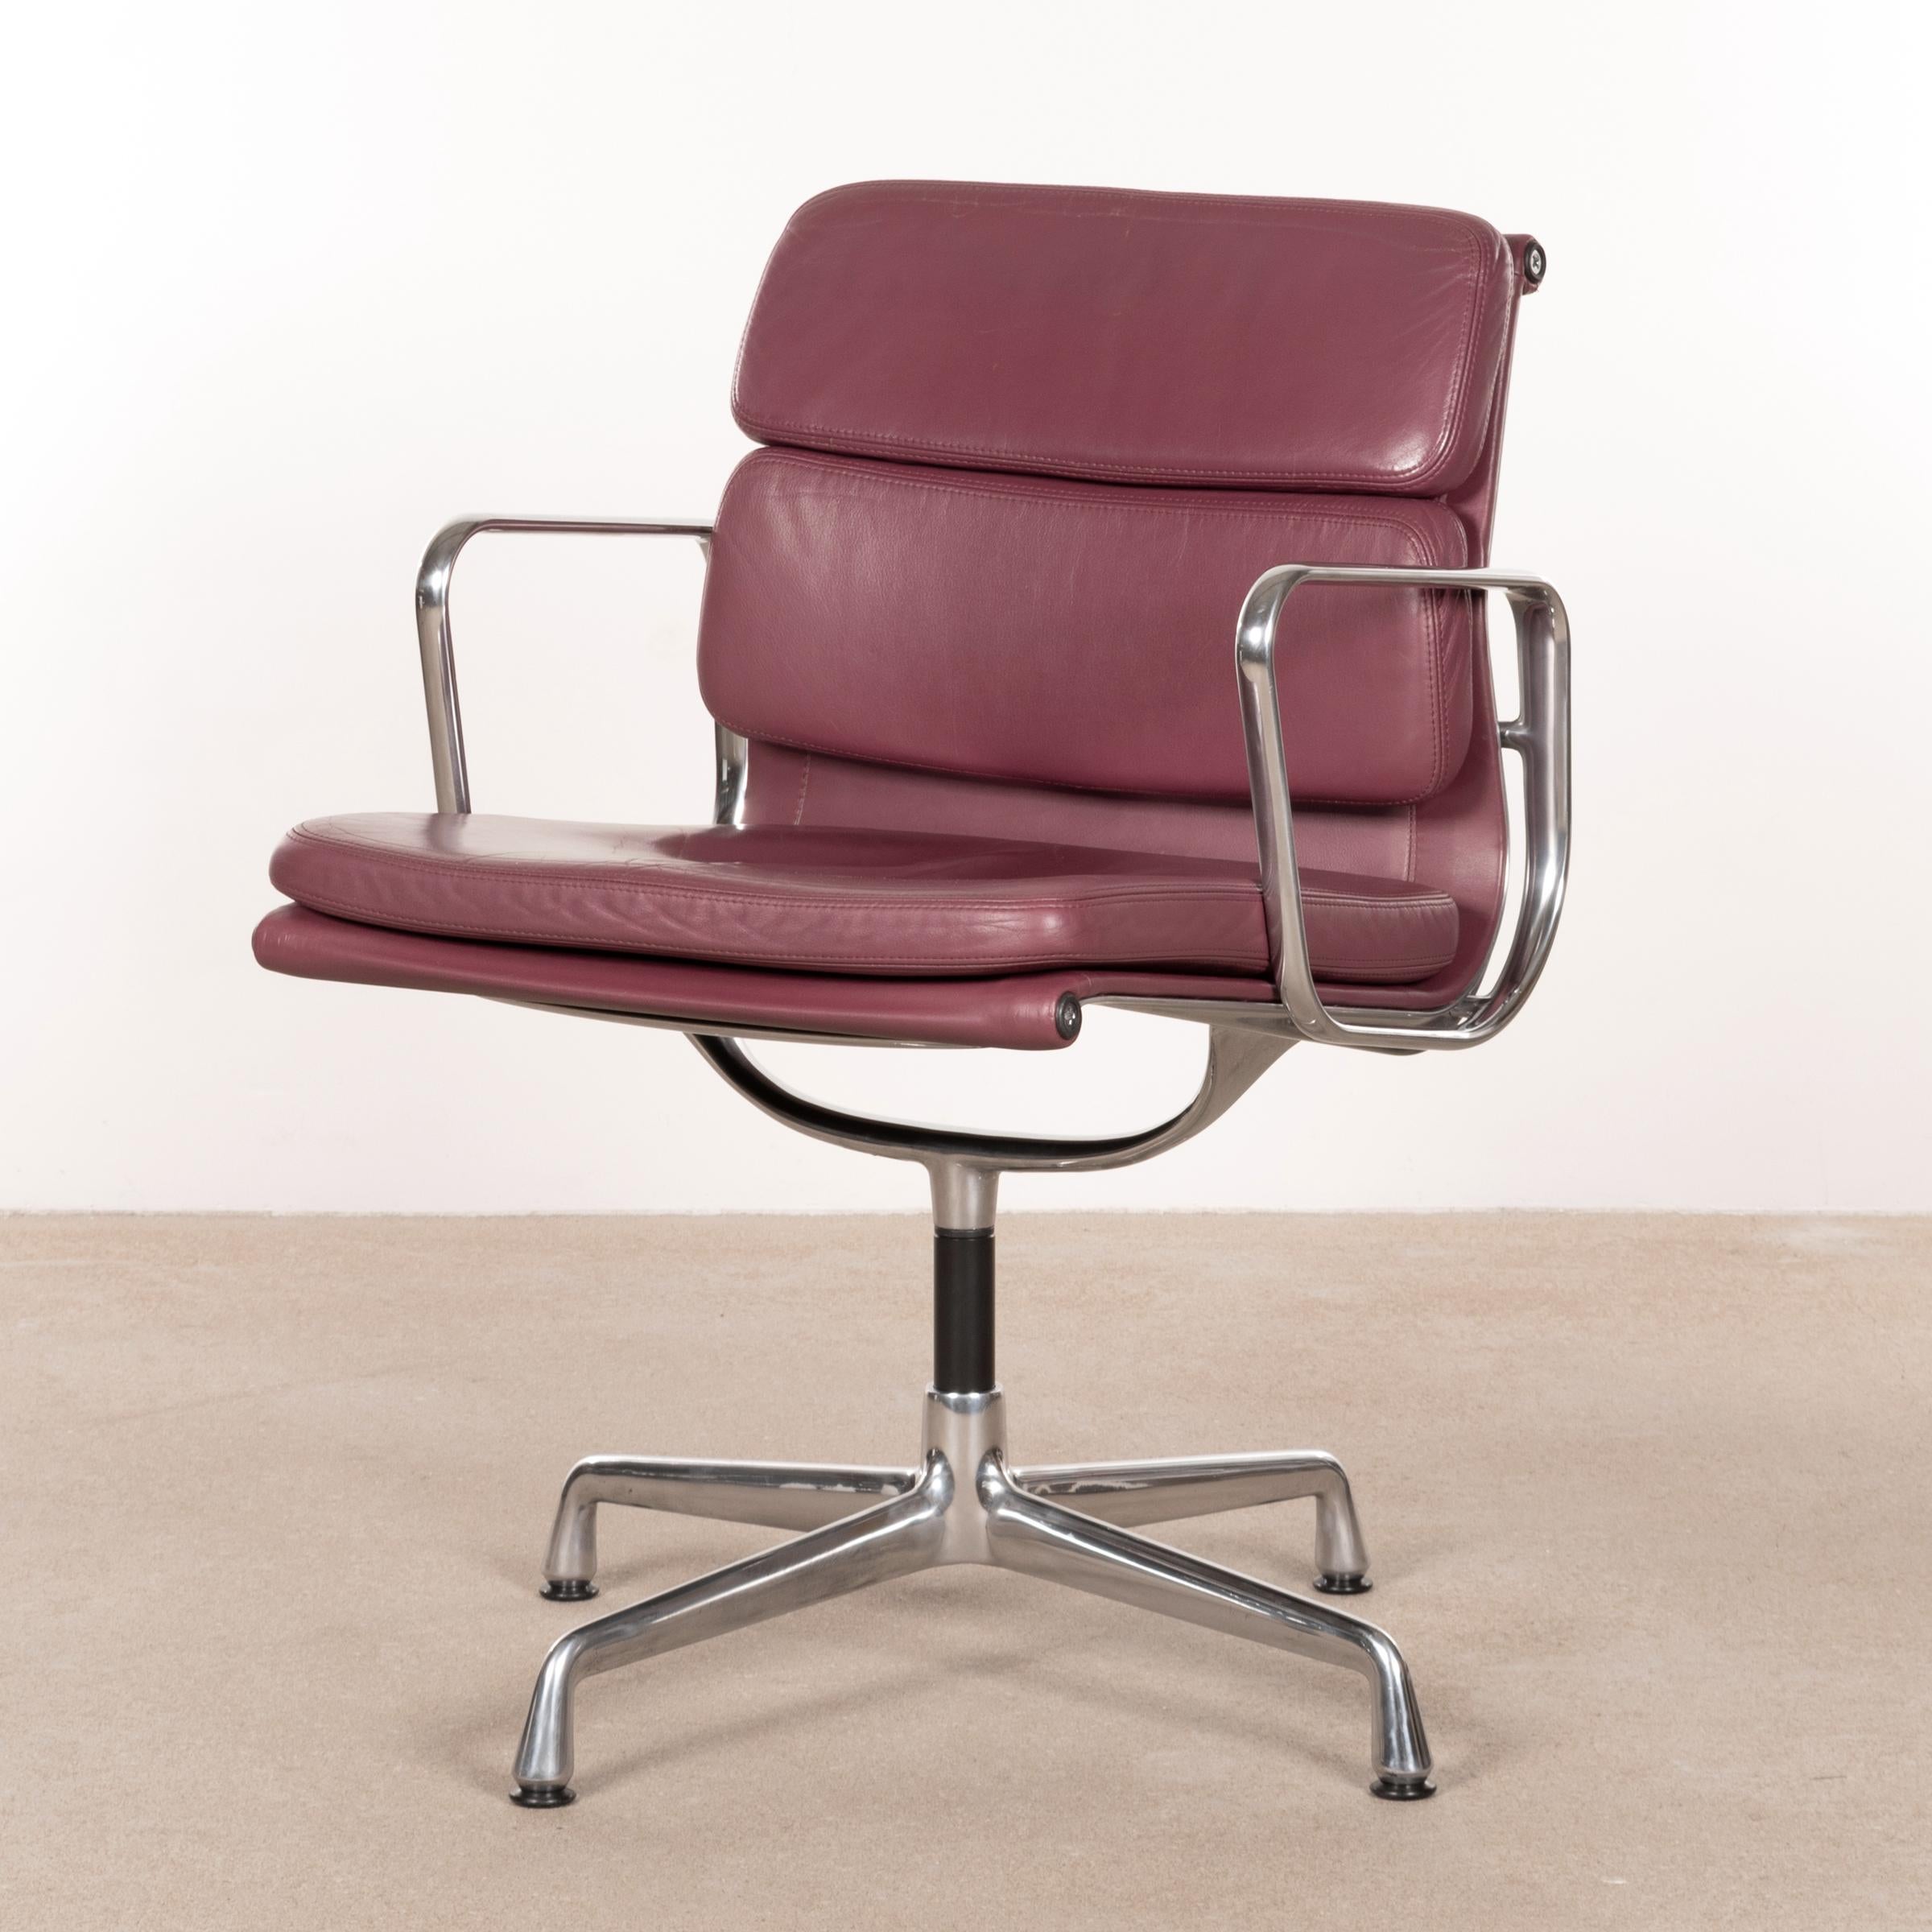 Comfortable Soft Pad set of 12 chairs designed by Charles & Ray Eames in 1969 and manufactured by Vitra. Polished aluminum frames with swivel function with leather cushions in an aubergine / purple tone. Backside also in leather which is optional in